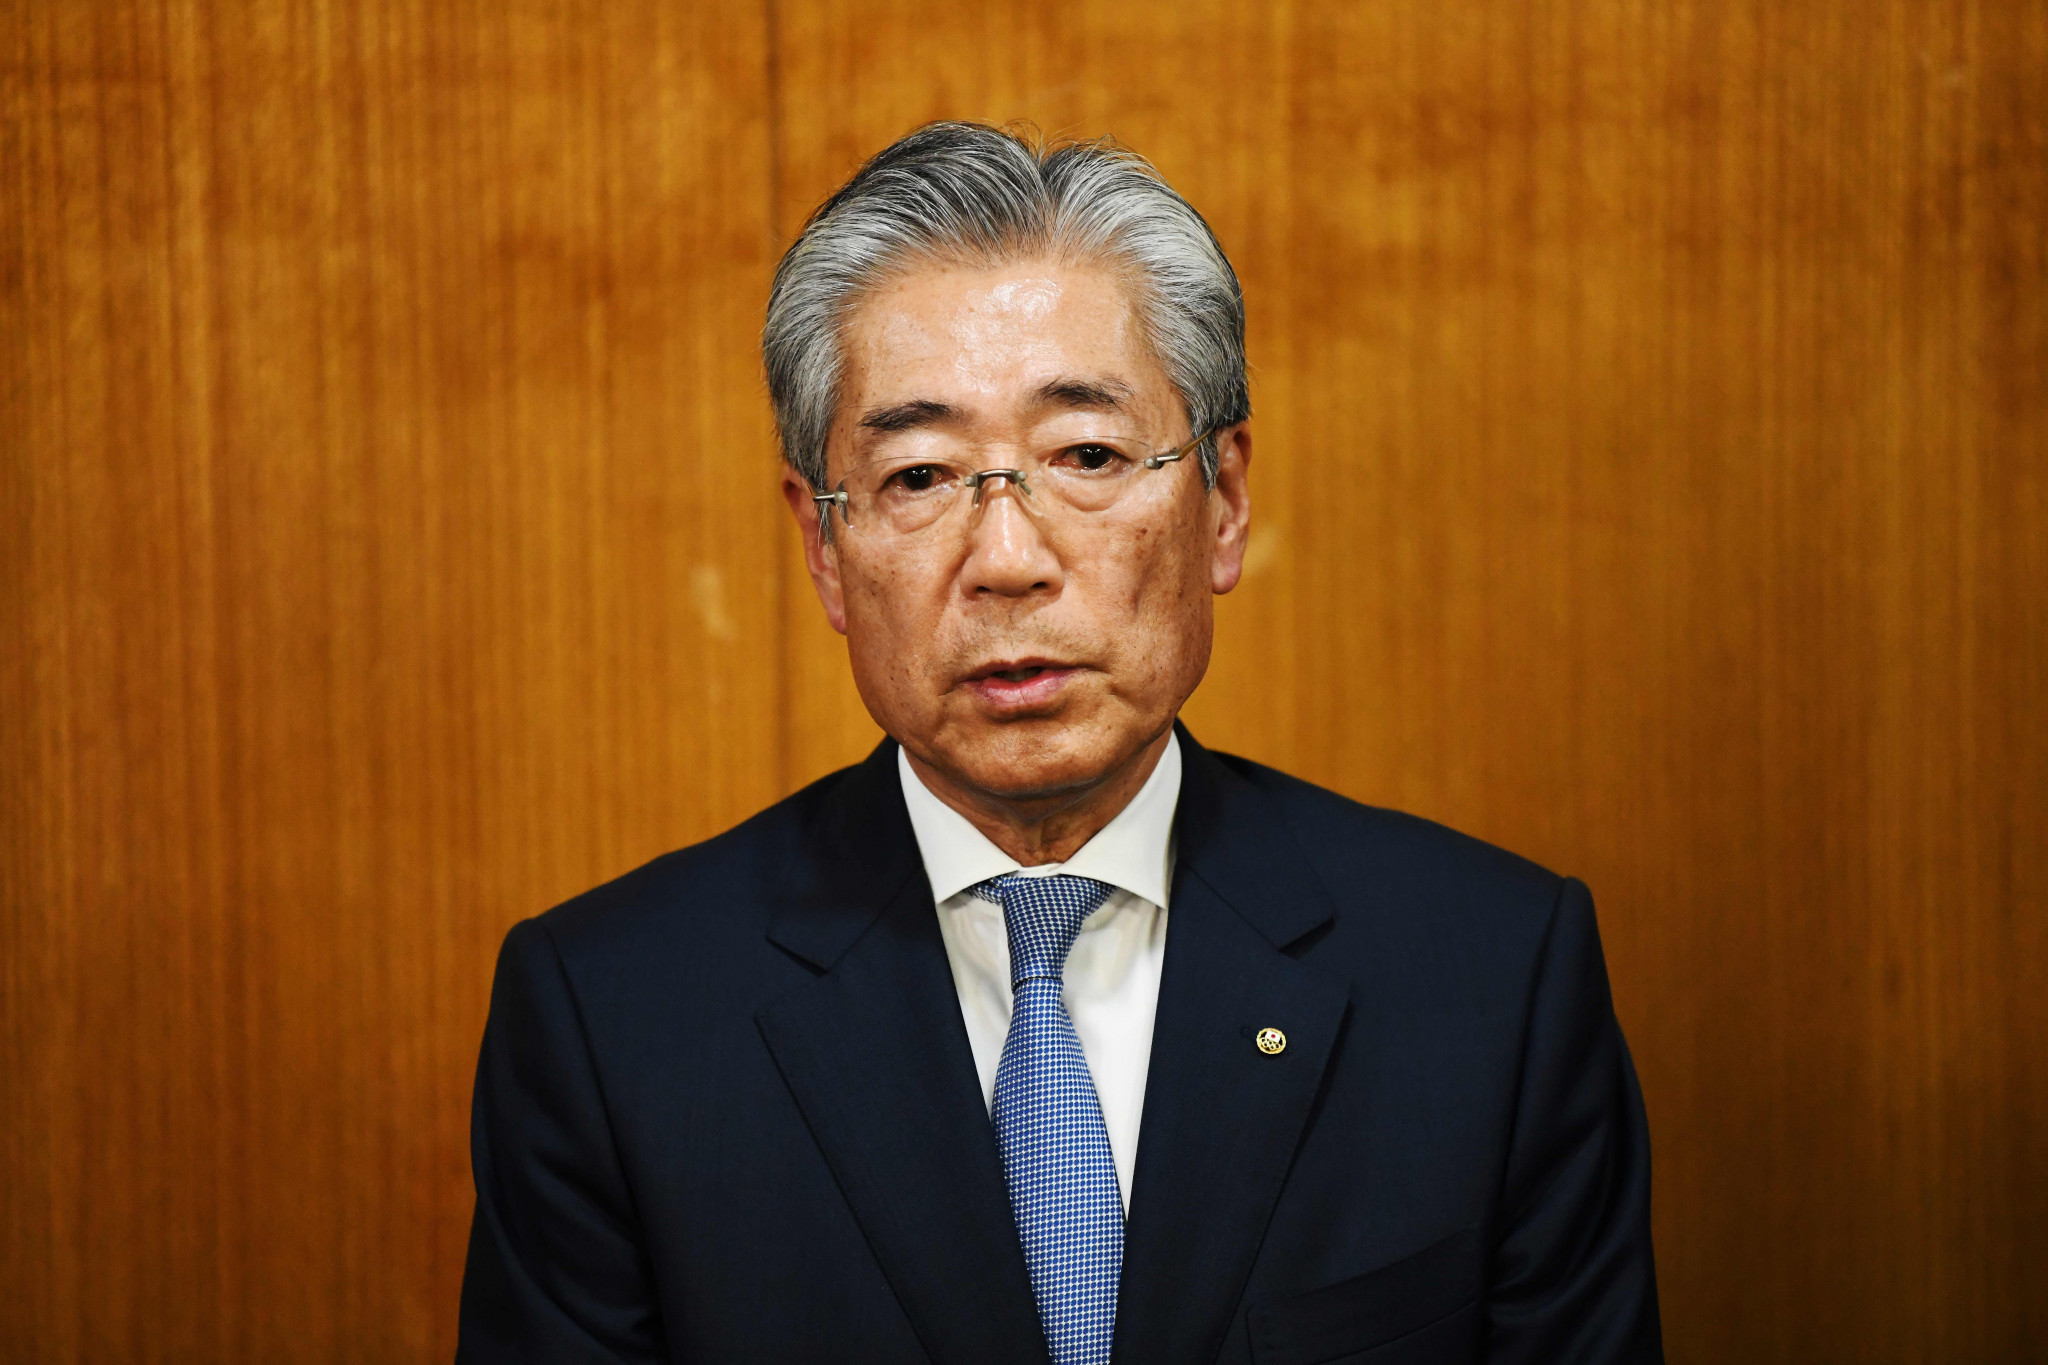 Tsunekazu Takeda is due to step down from his role as President of the Japanese Olympic Committee this month after being implicated in an alleged bribery scandal connected to Tokyo's successful bid for the 2020 Olympic and Paralympic Games ©Getty Images